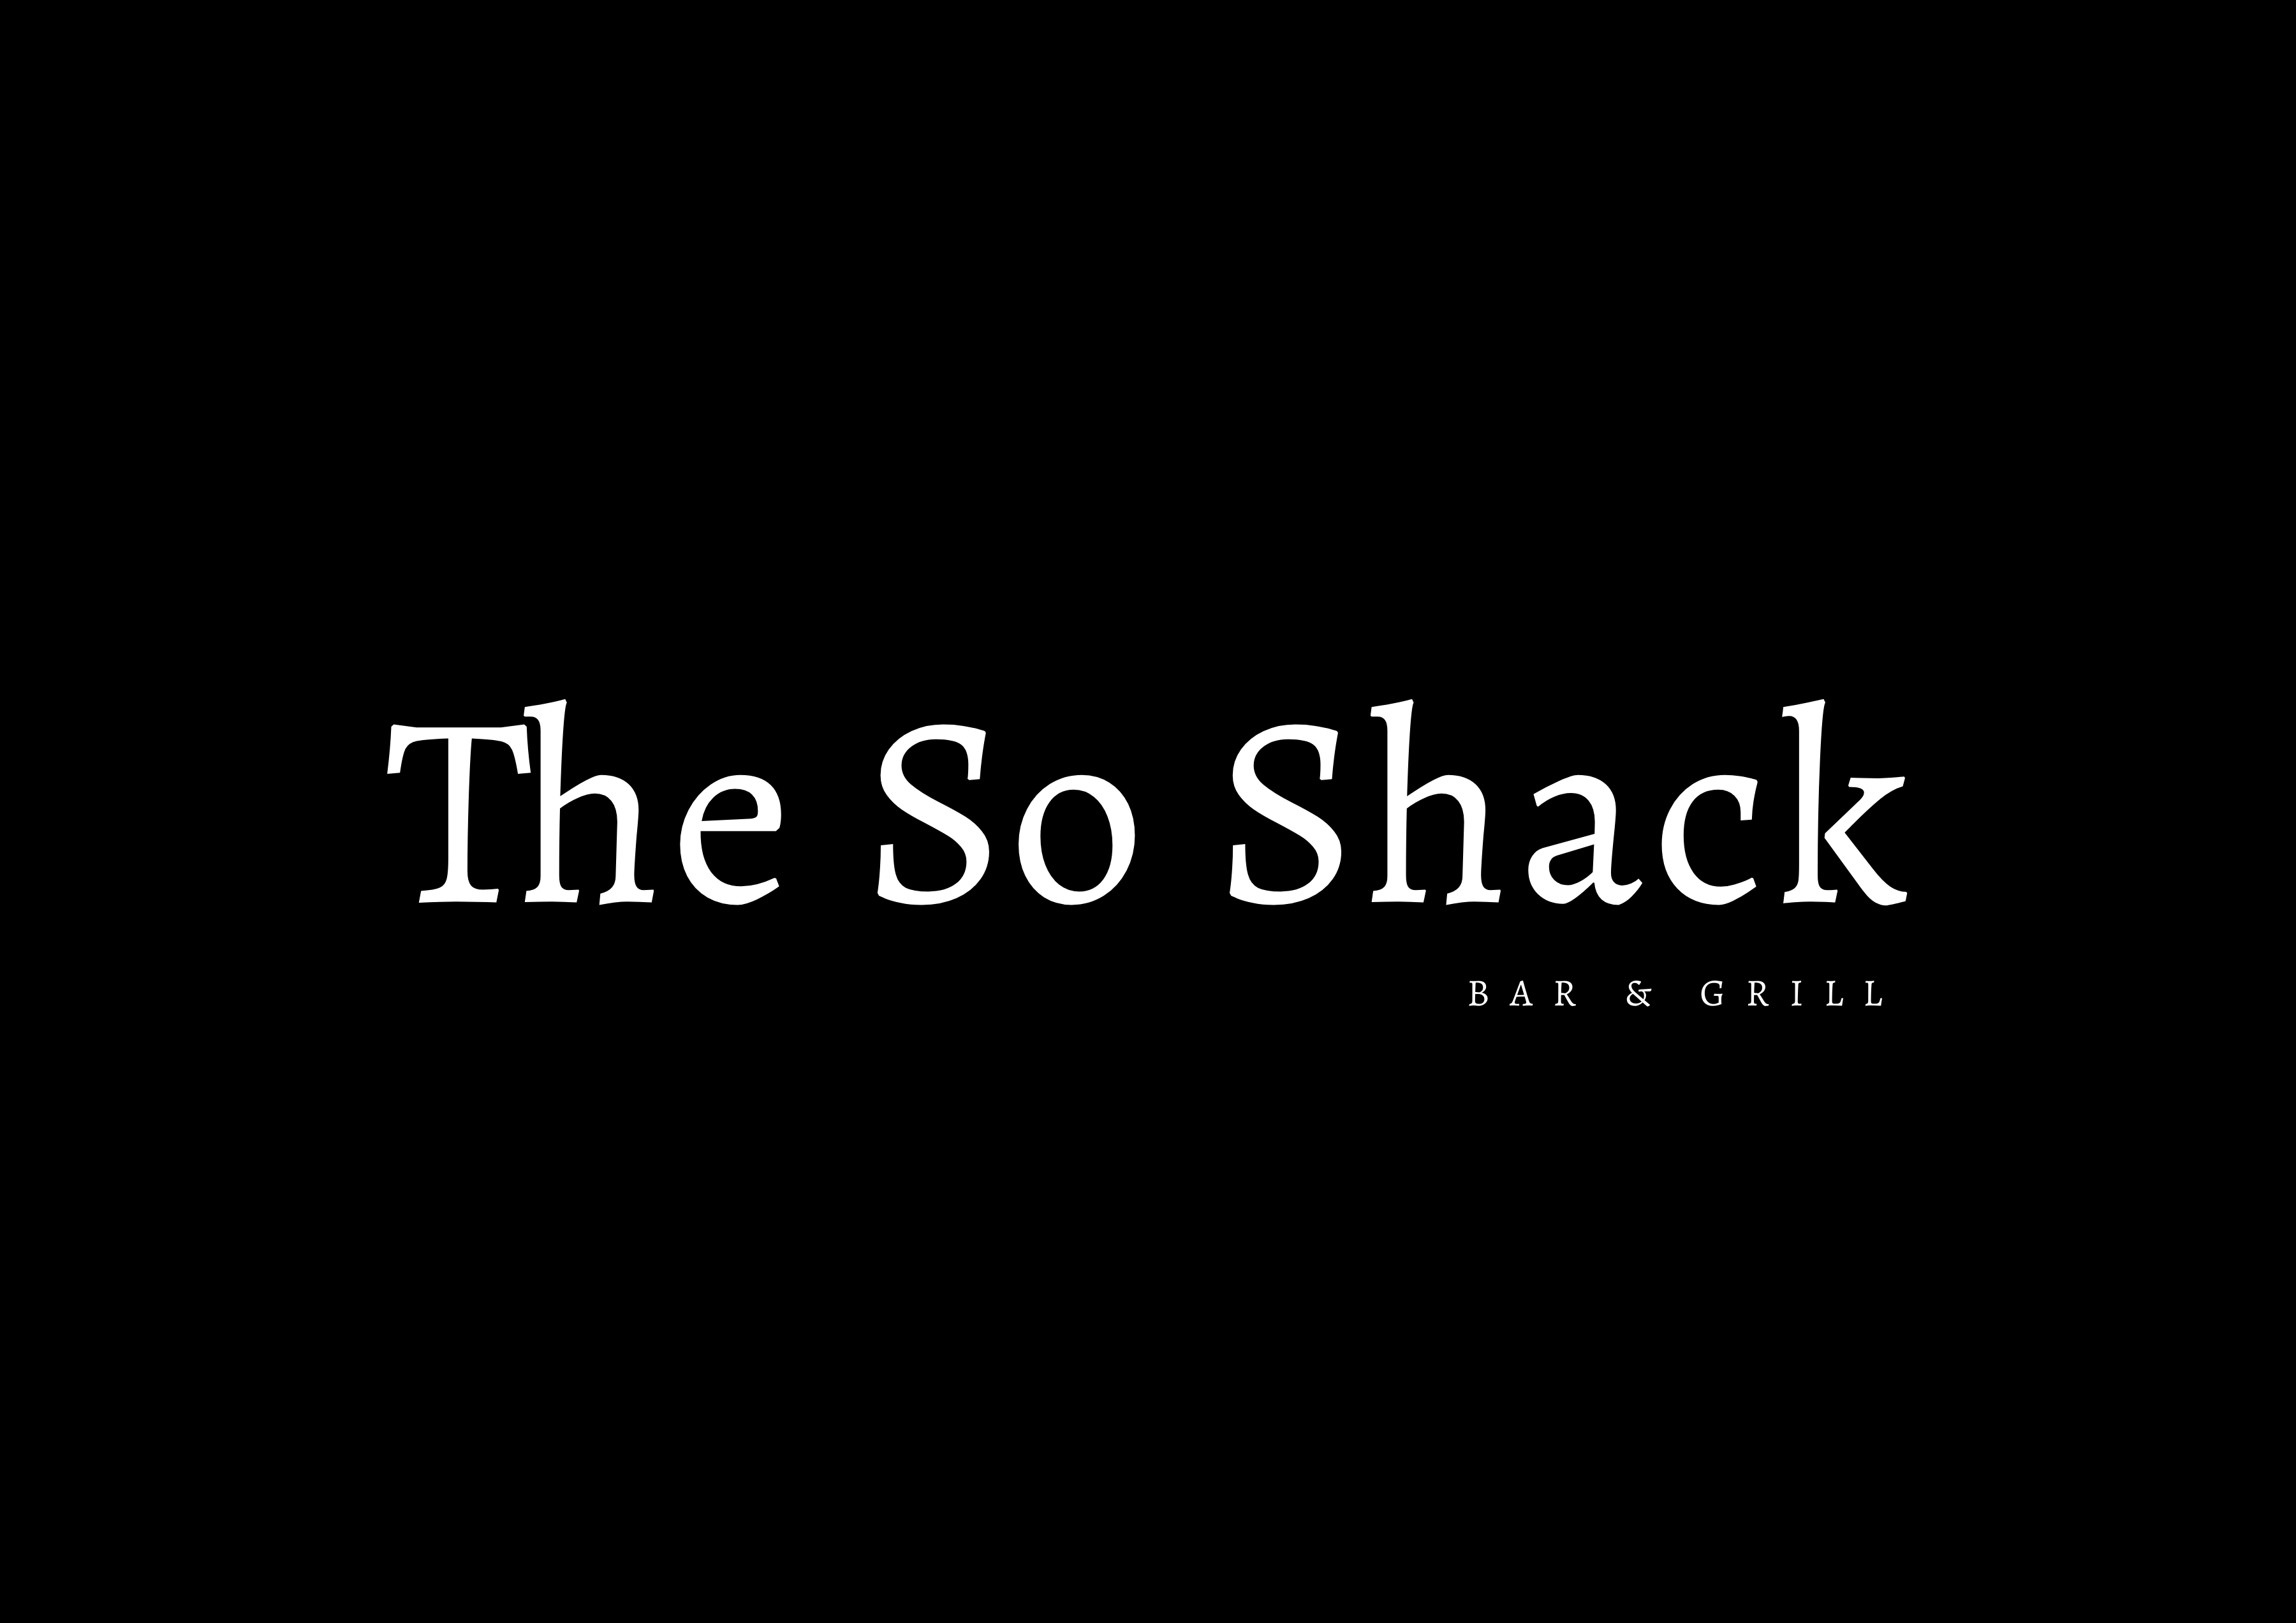 The Soul Shack Bar & Grill